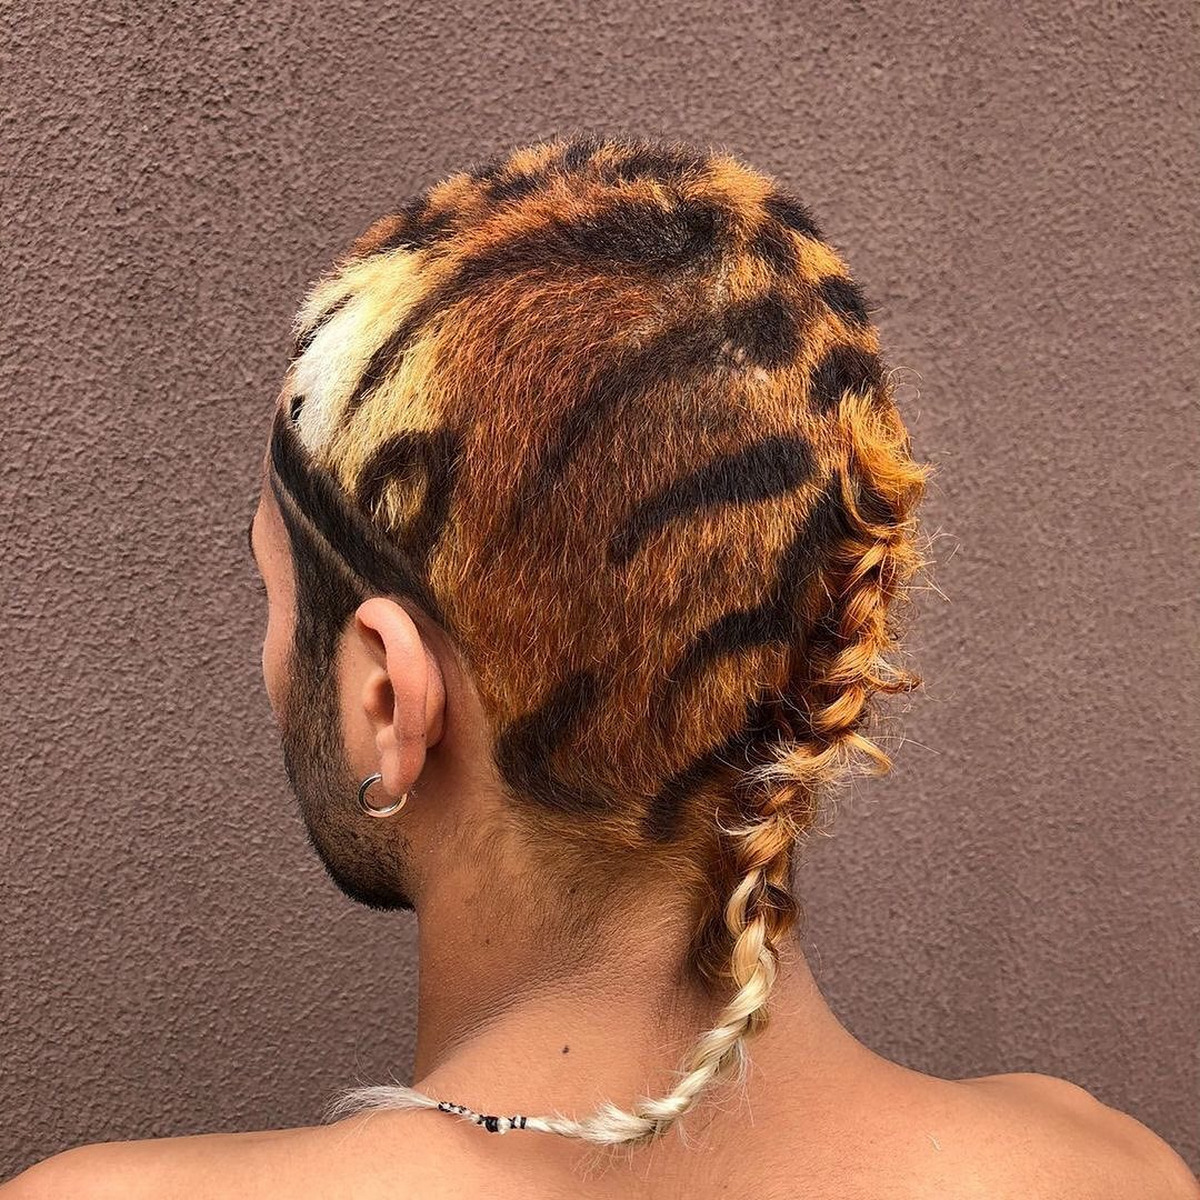 Braided Tail In Tiger Inspired Bald 